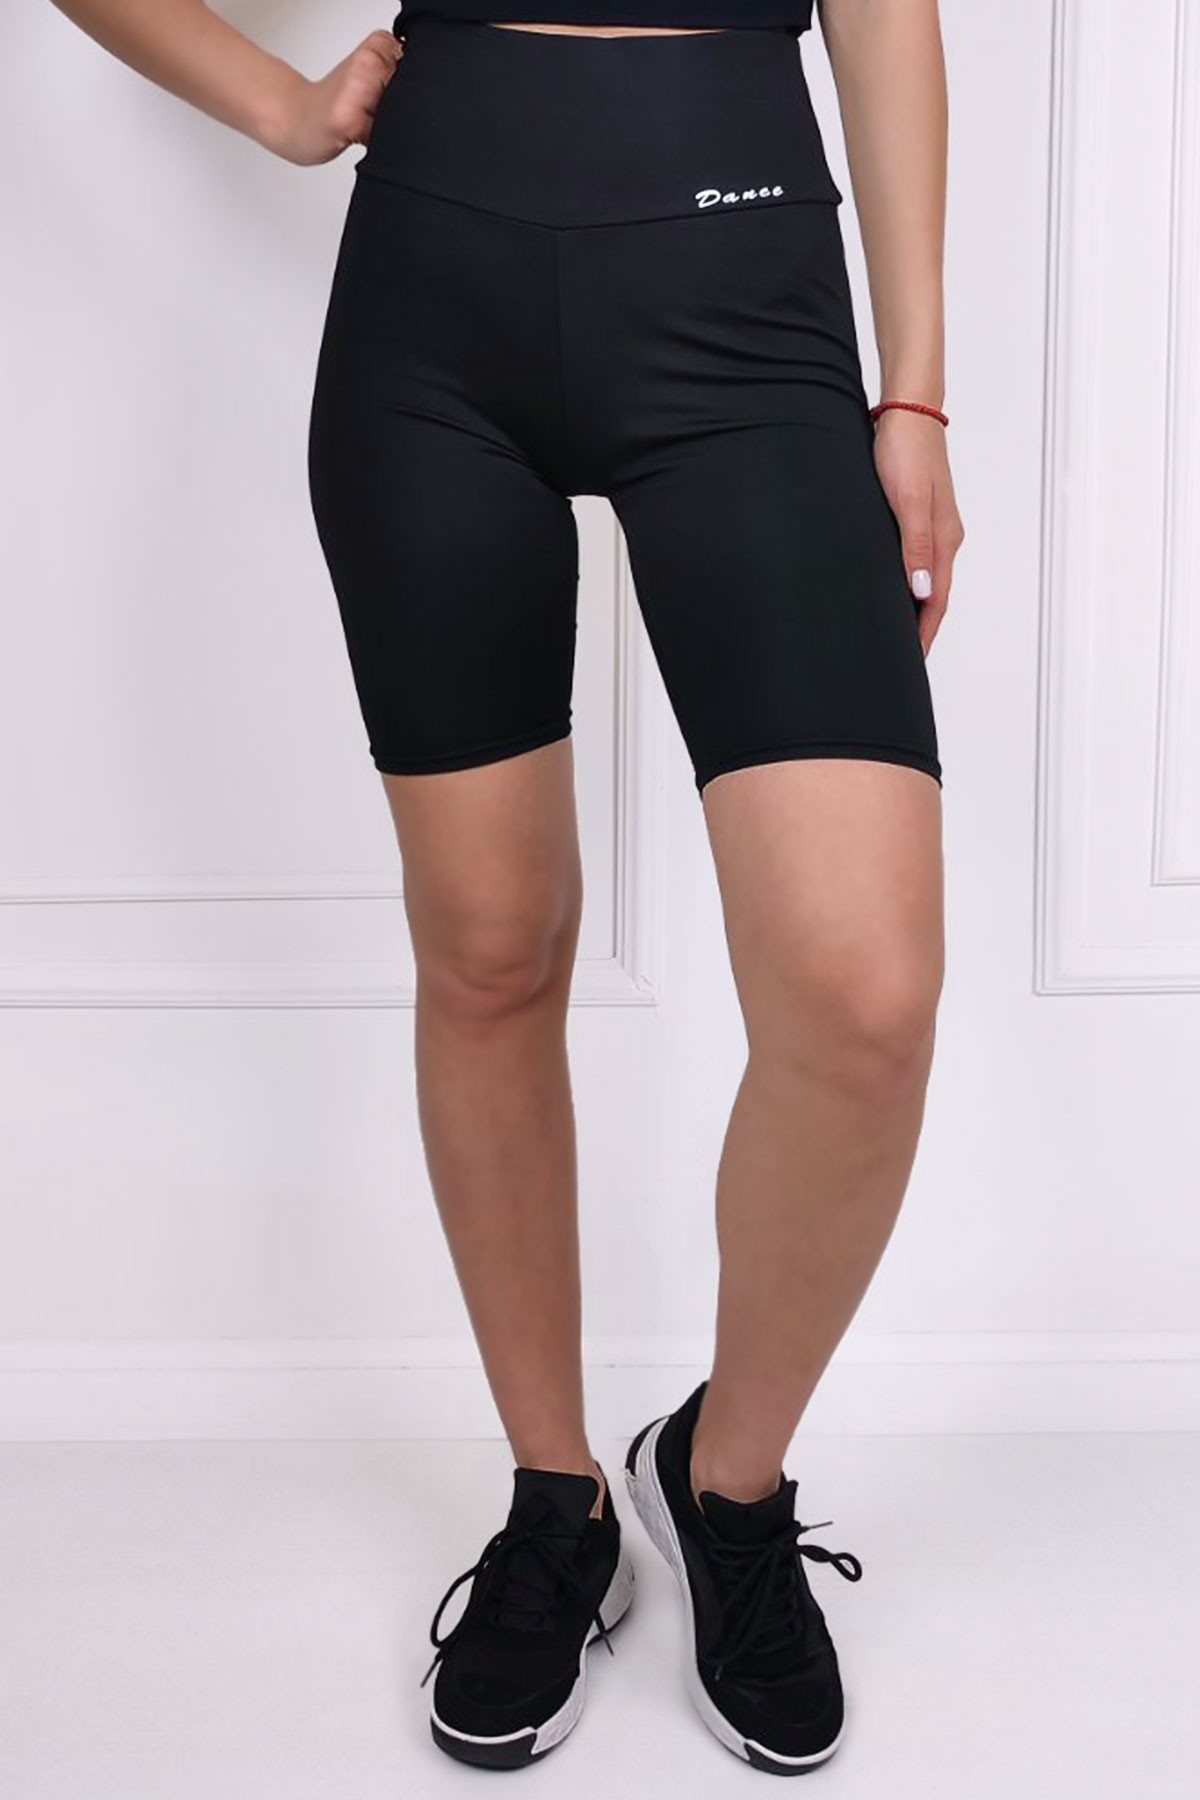 Women's short leggings with a high belt   - Women's and men's  clothing and accessories at affordable prices.